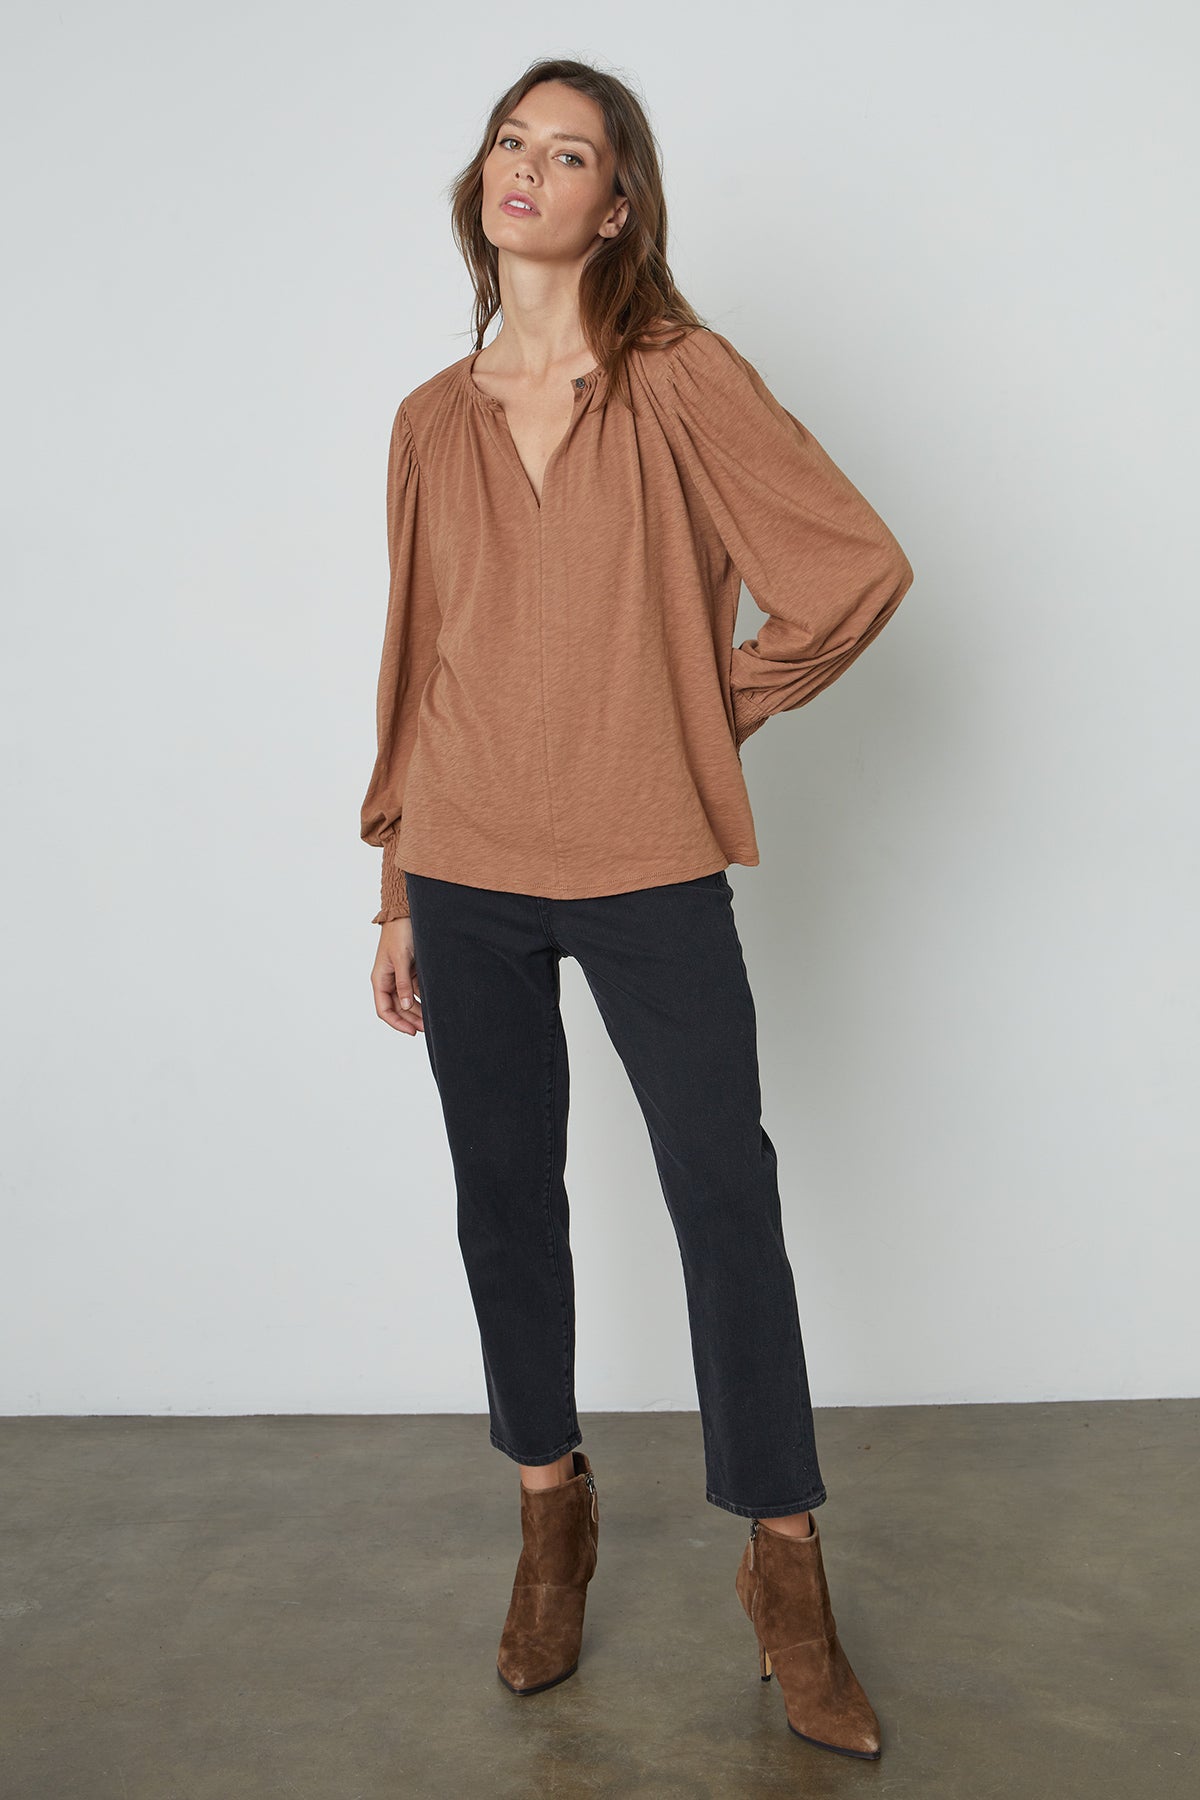 Irina Split Neck Tee in Camel front view with denim and boots-25078407823553